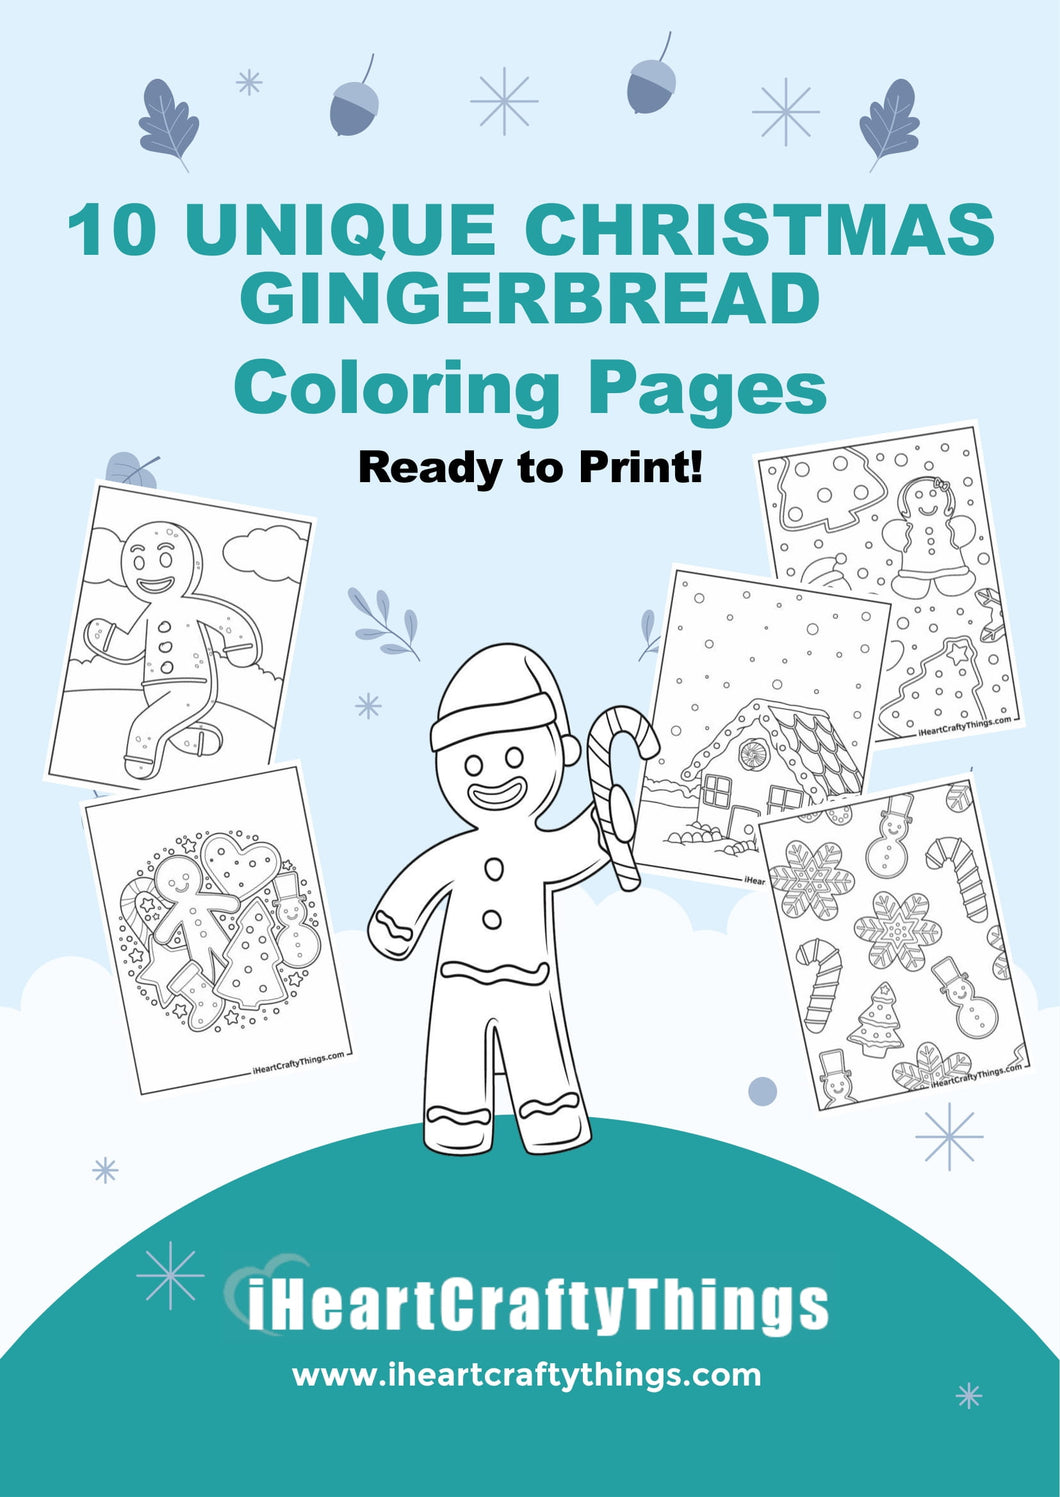 10 GINGERBREAD COLORING PAGES